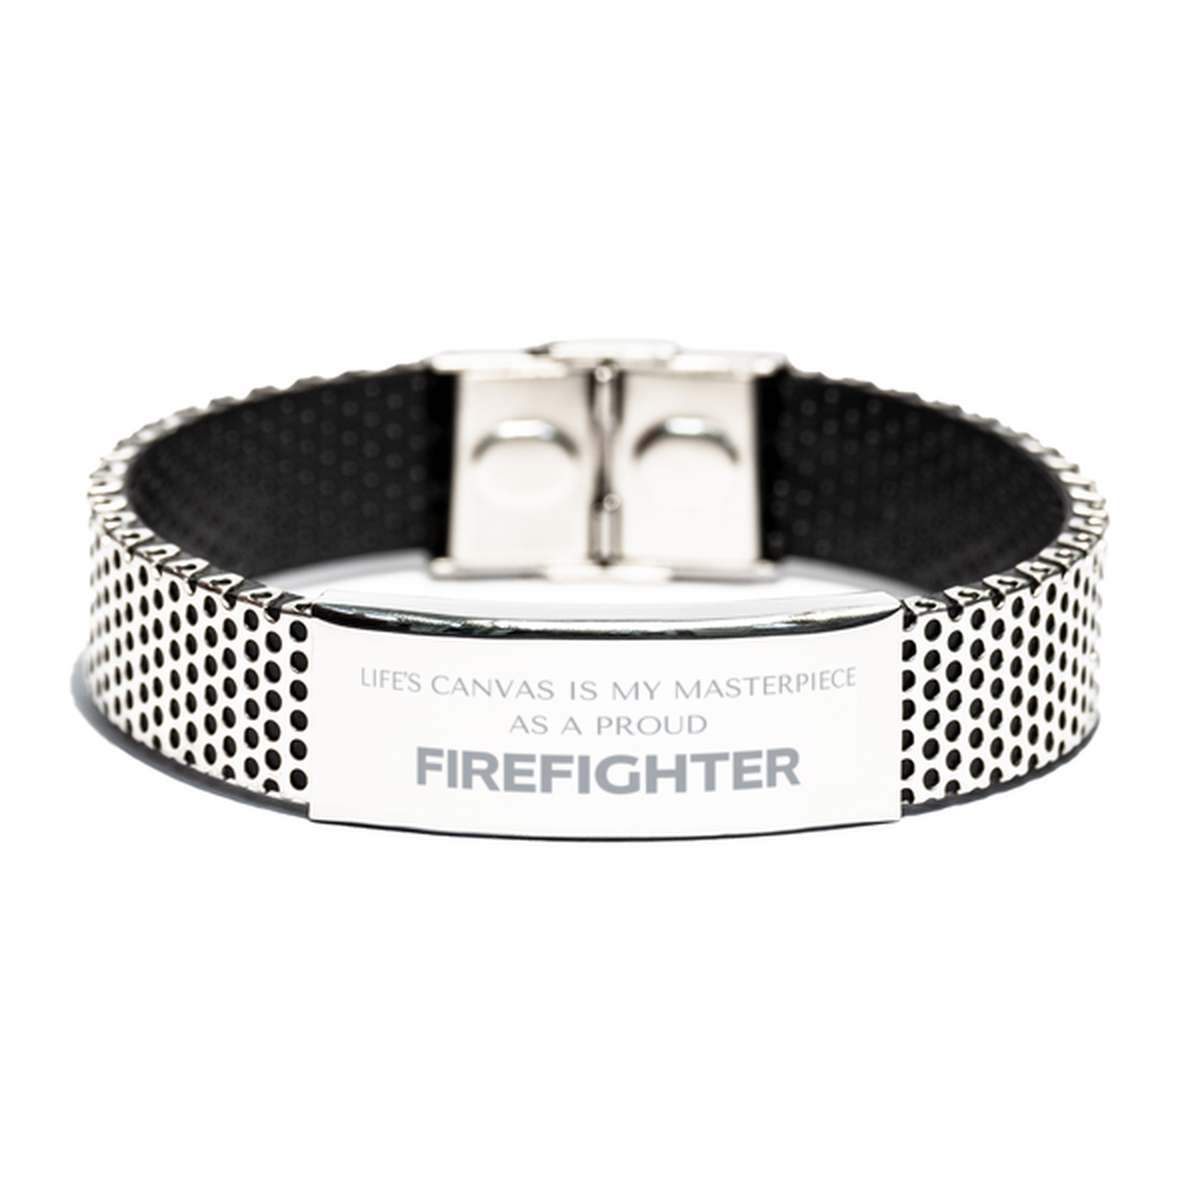 Proud Firefighter Gifts, Life's canvas is my masterpiece, Epic Birthday Christmas Unique Stainless Steel Bracelet For Firefighter, Coworkers, Men, Women, Friends